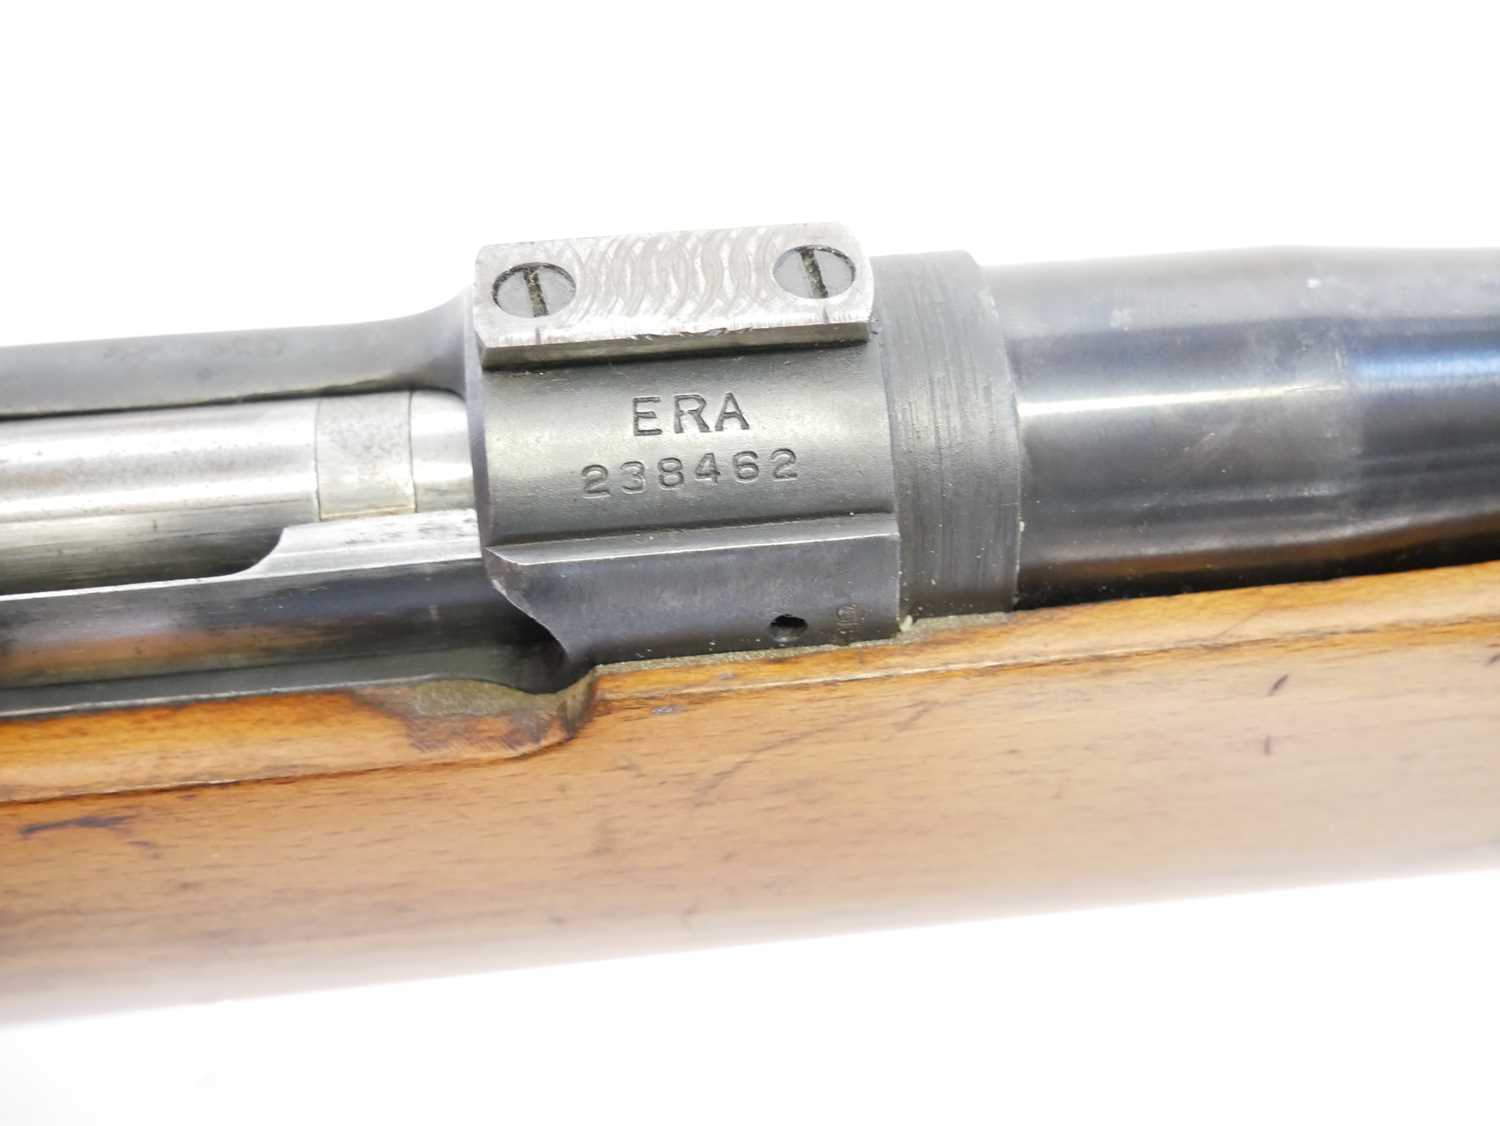 ERA P14 bolt action converted into a 7.62 x 51 target rifle, serial number 238462, 28inch heavy - Image 6 of 12